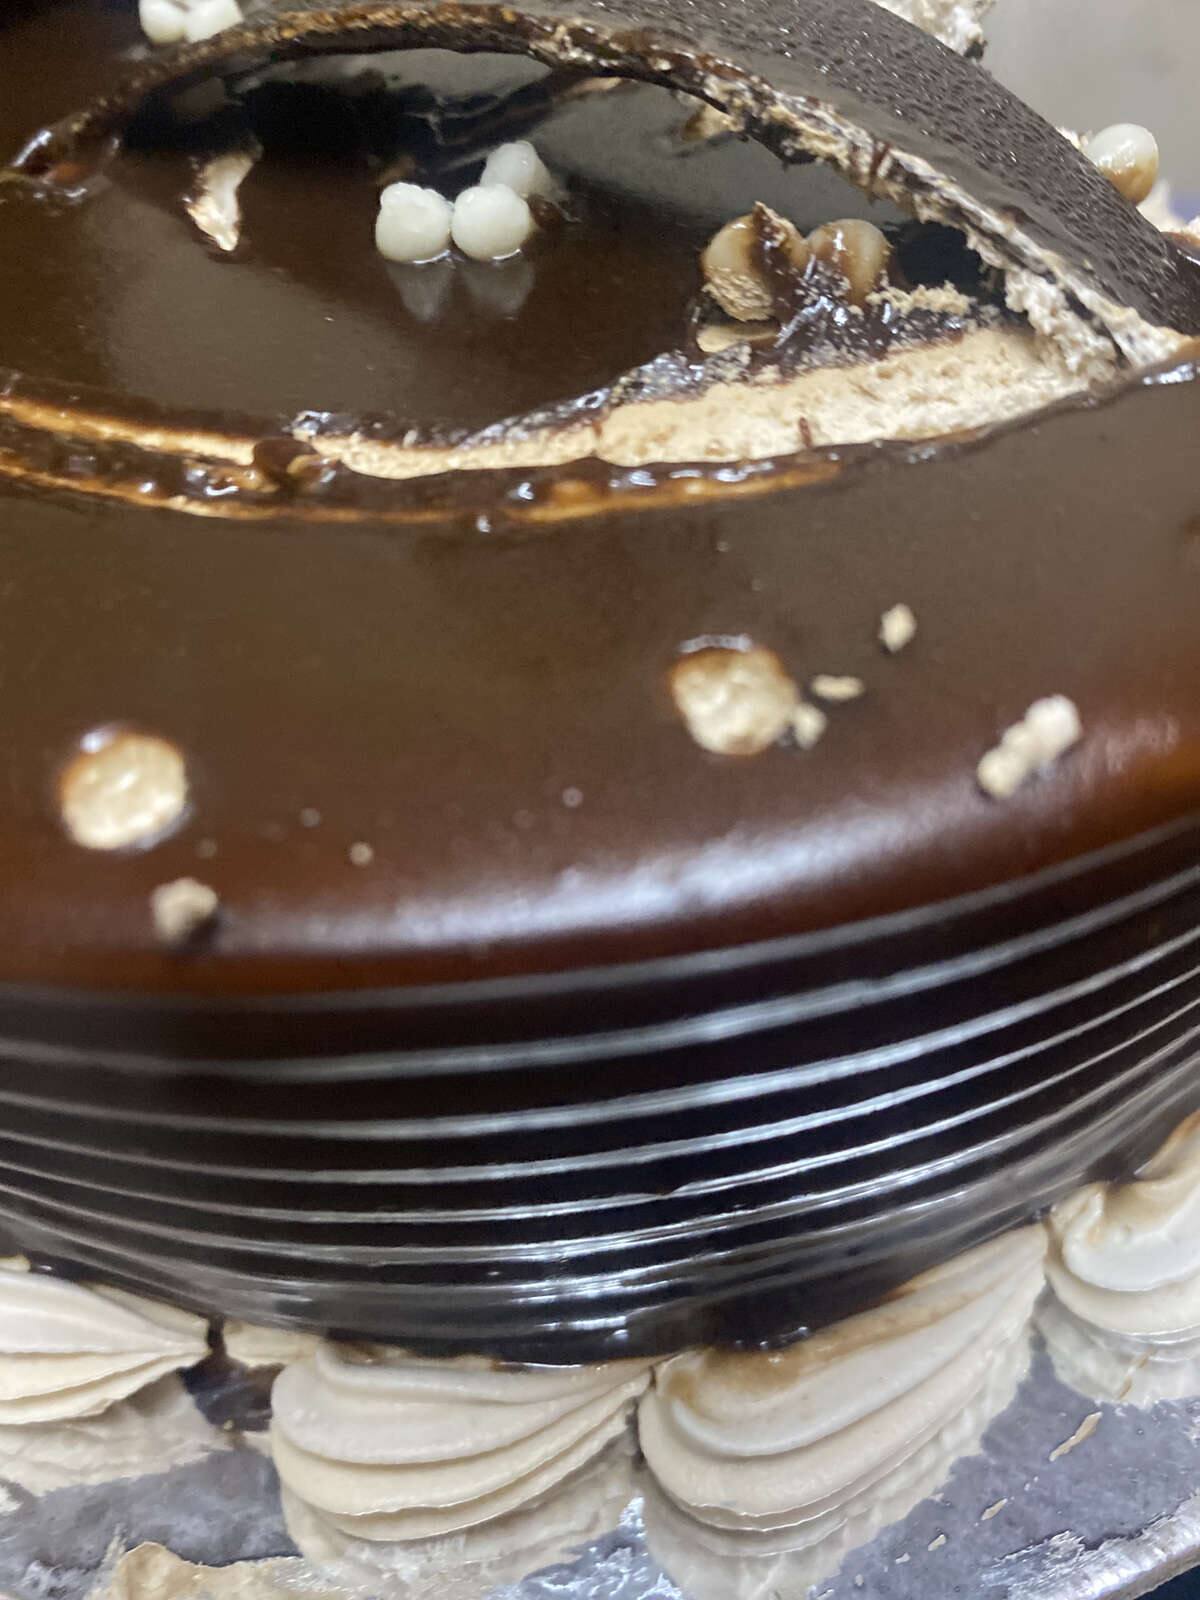 SANAS - 👸If you know the basics it's time to take your cake journey into  the next level. #AdvancedCreamClass 😍Flavourful cakes the next level. The  professional baking class ⏰Date 9th & 10th